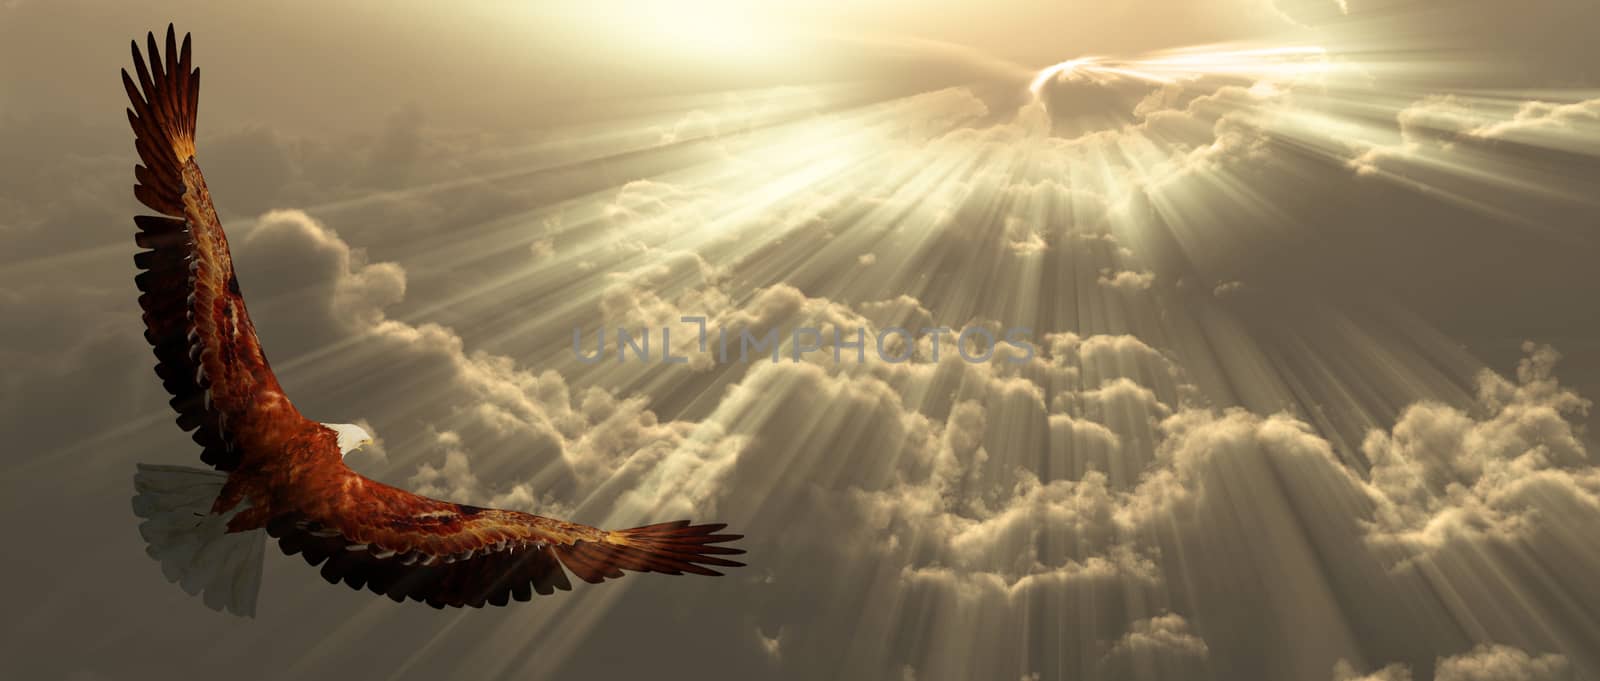 Eagle in clouds by applesstock